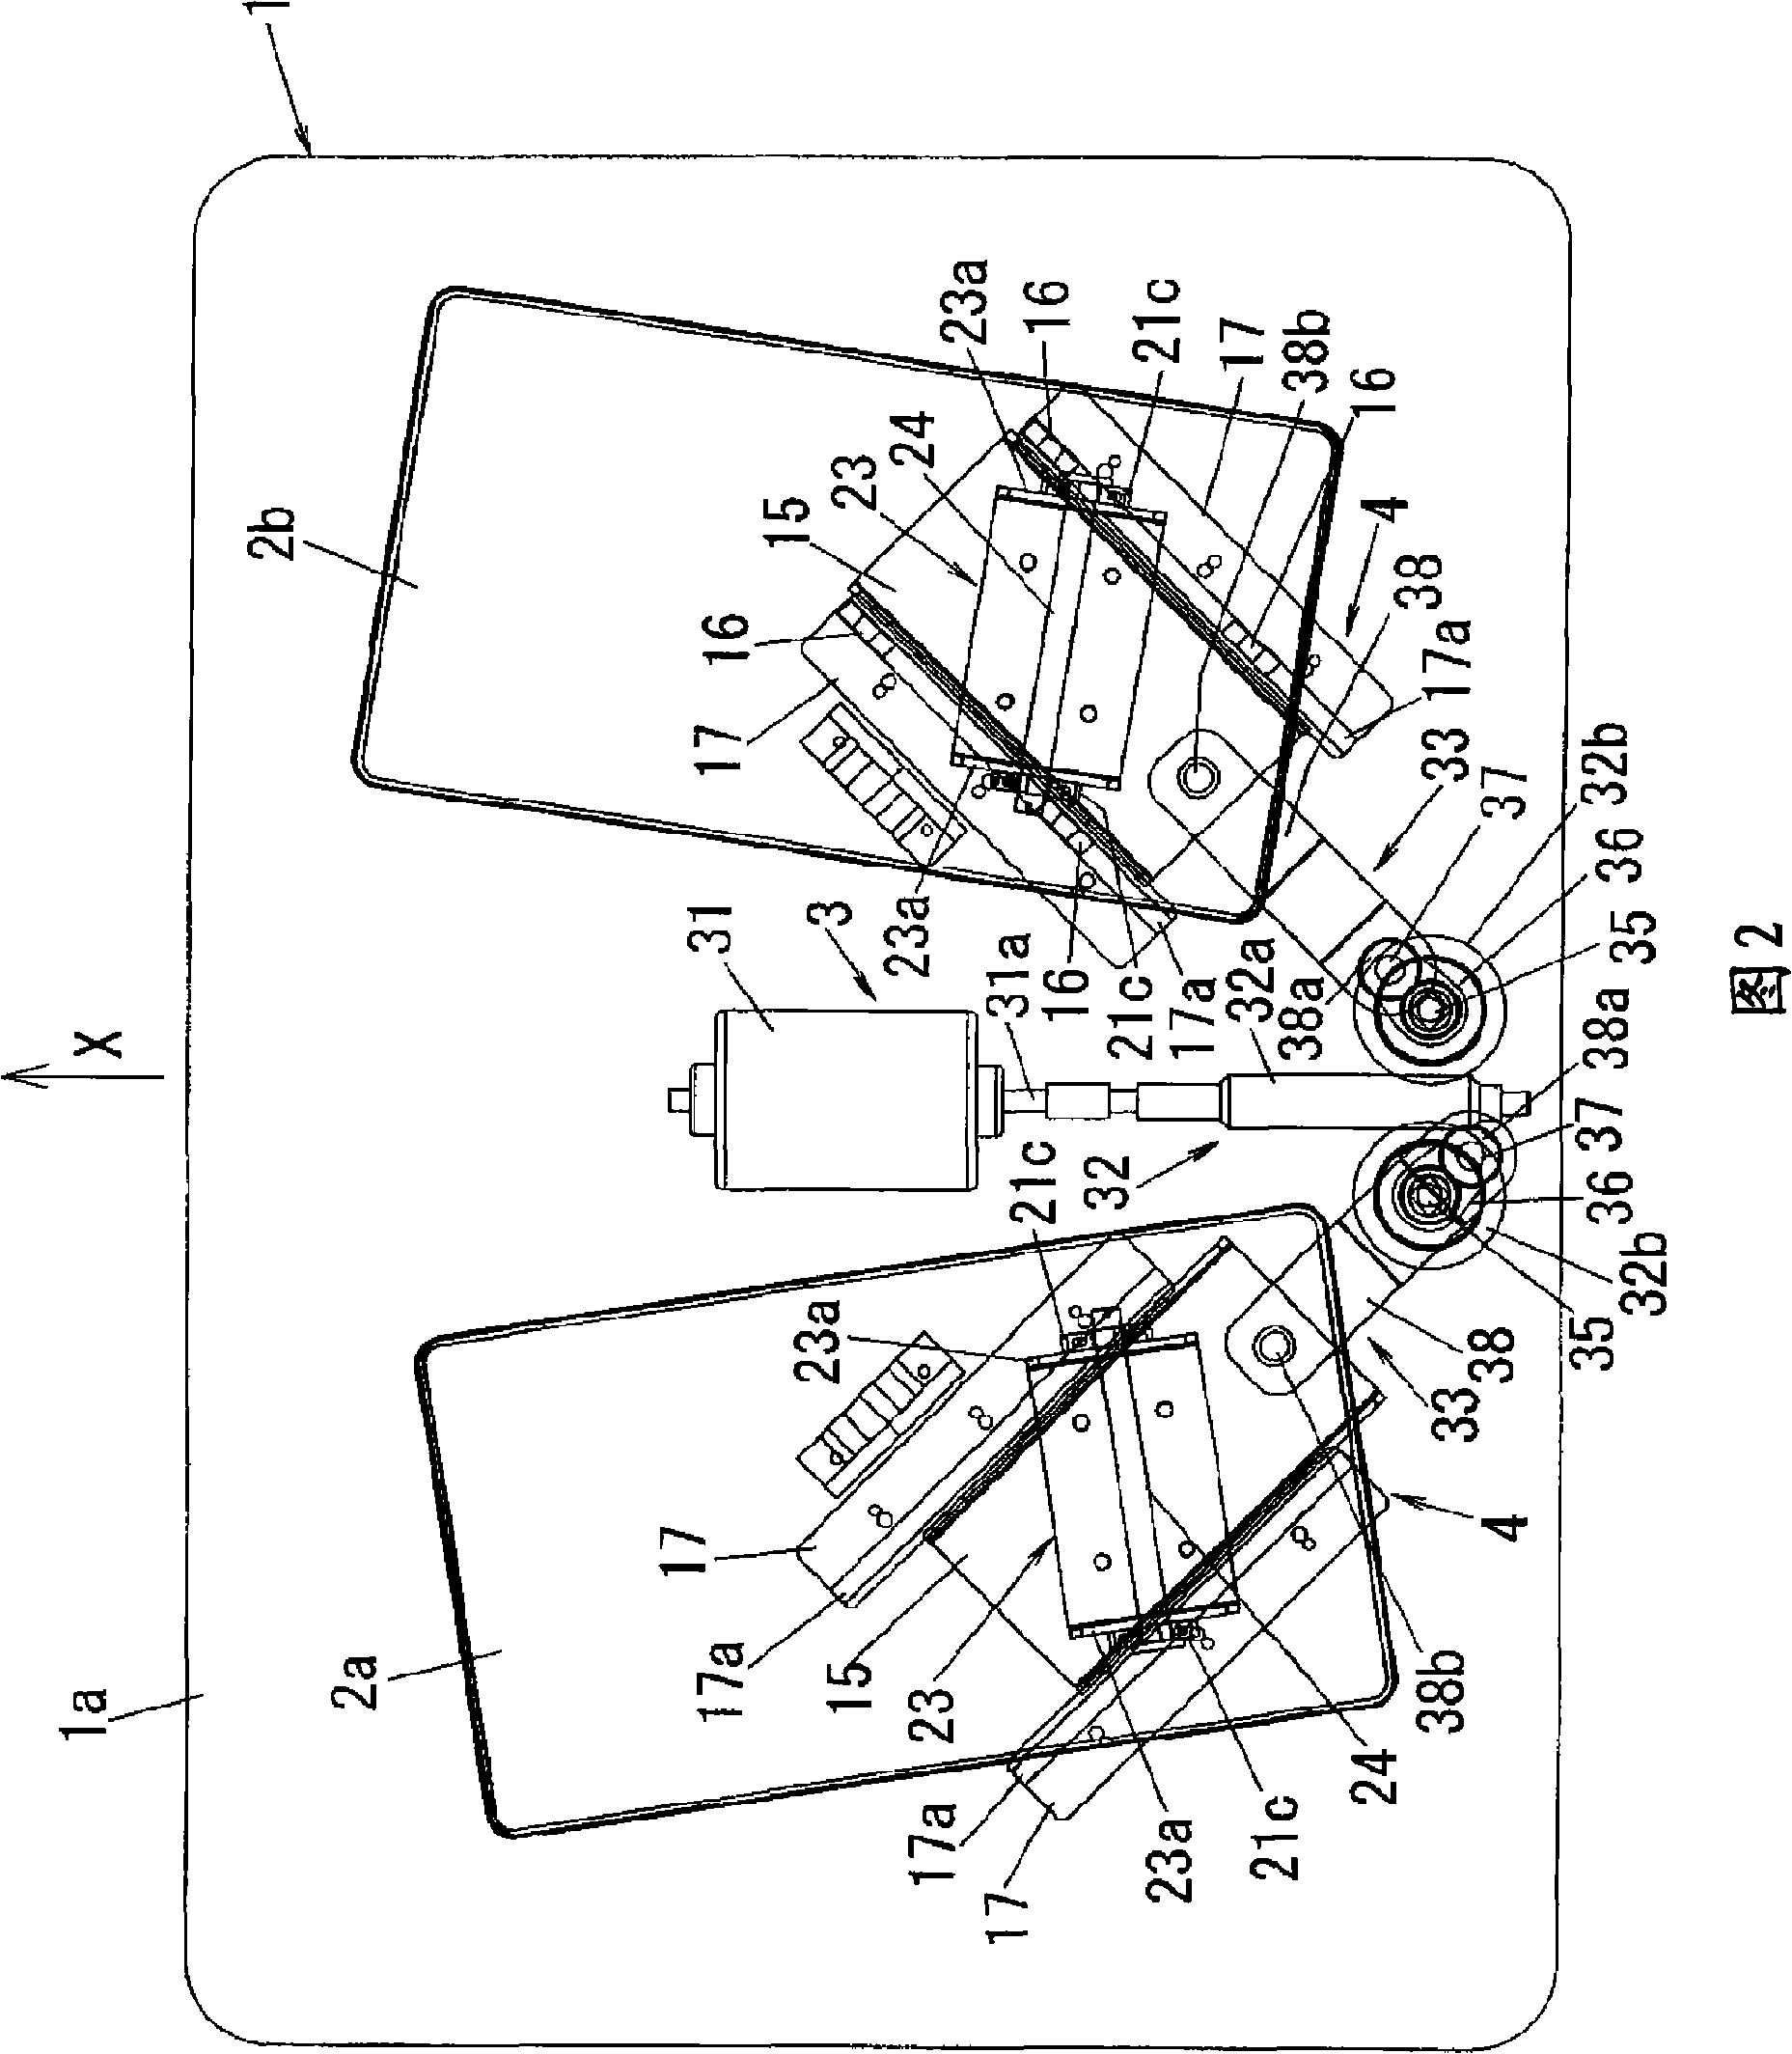 Passive motion-type exercise assistance device